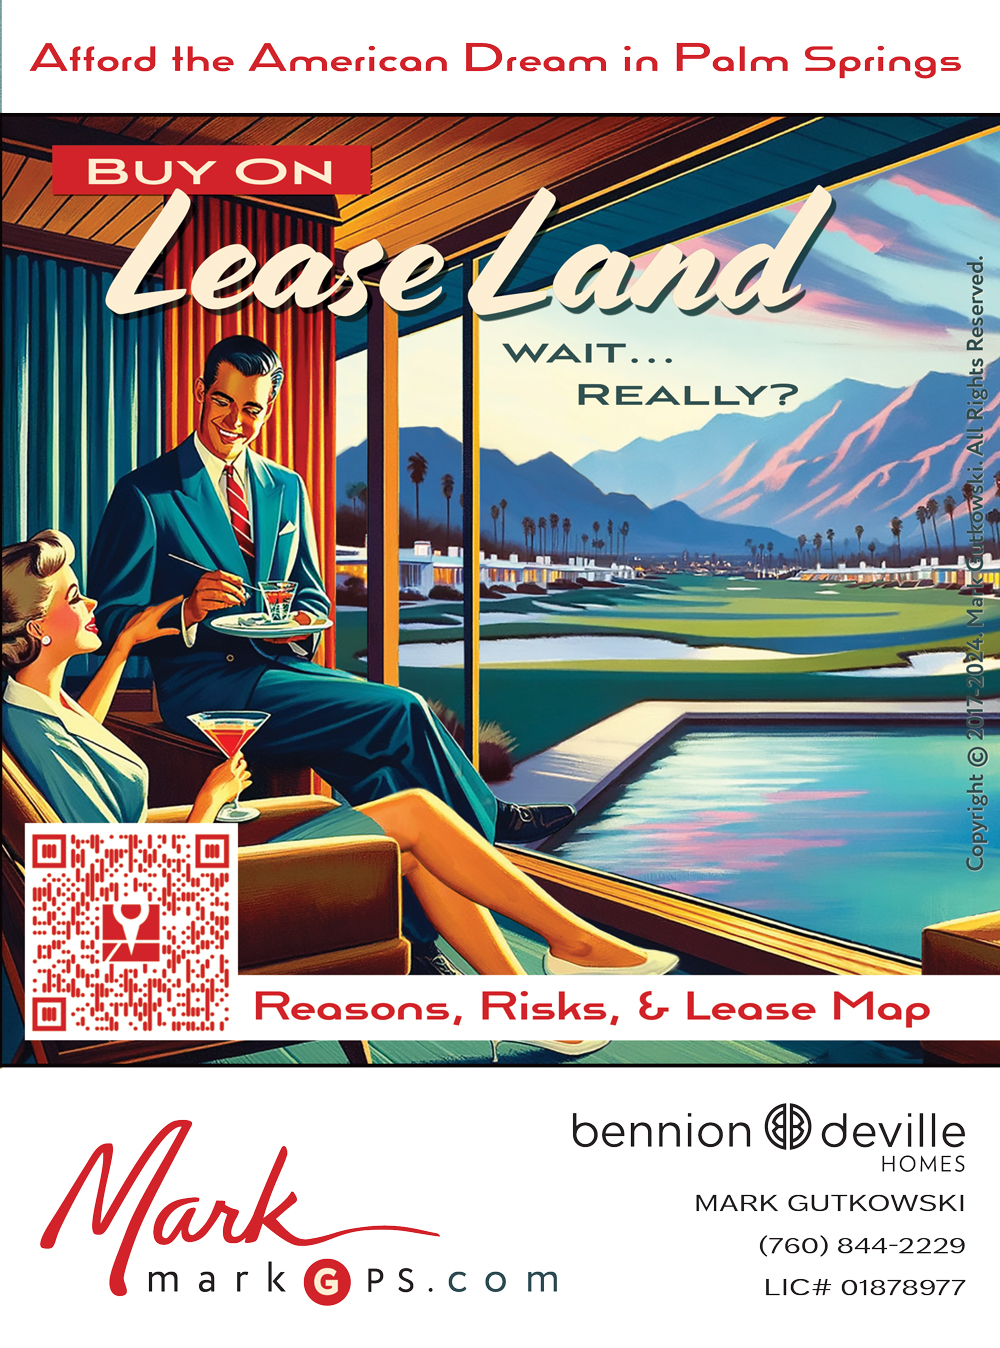 This Mid-century vintage travel poster describes that buying on Palm Springs lease land is potentially a way to afford the American dream of home ownership. A woman and man sit in a stylish mid-centry modern home looking across the pool outside at the Indian Canyons neighborhood and the San Jacinto mountain range at sunset. Mark Gutkowski Realto has a QR code labled Reasons, Risks, and Lease Map to allow scanning and see the Palm Springs Lease Land Map online with Lease Land Maps for each Palm Springs Neighborhood. This map shows that the invisible checkerboard of Palm Springs Lease Land is not actually a checkerboard pattern when considering residential real estate on Lease Land in Palm Springs.